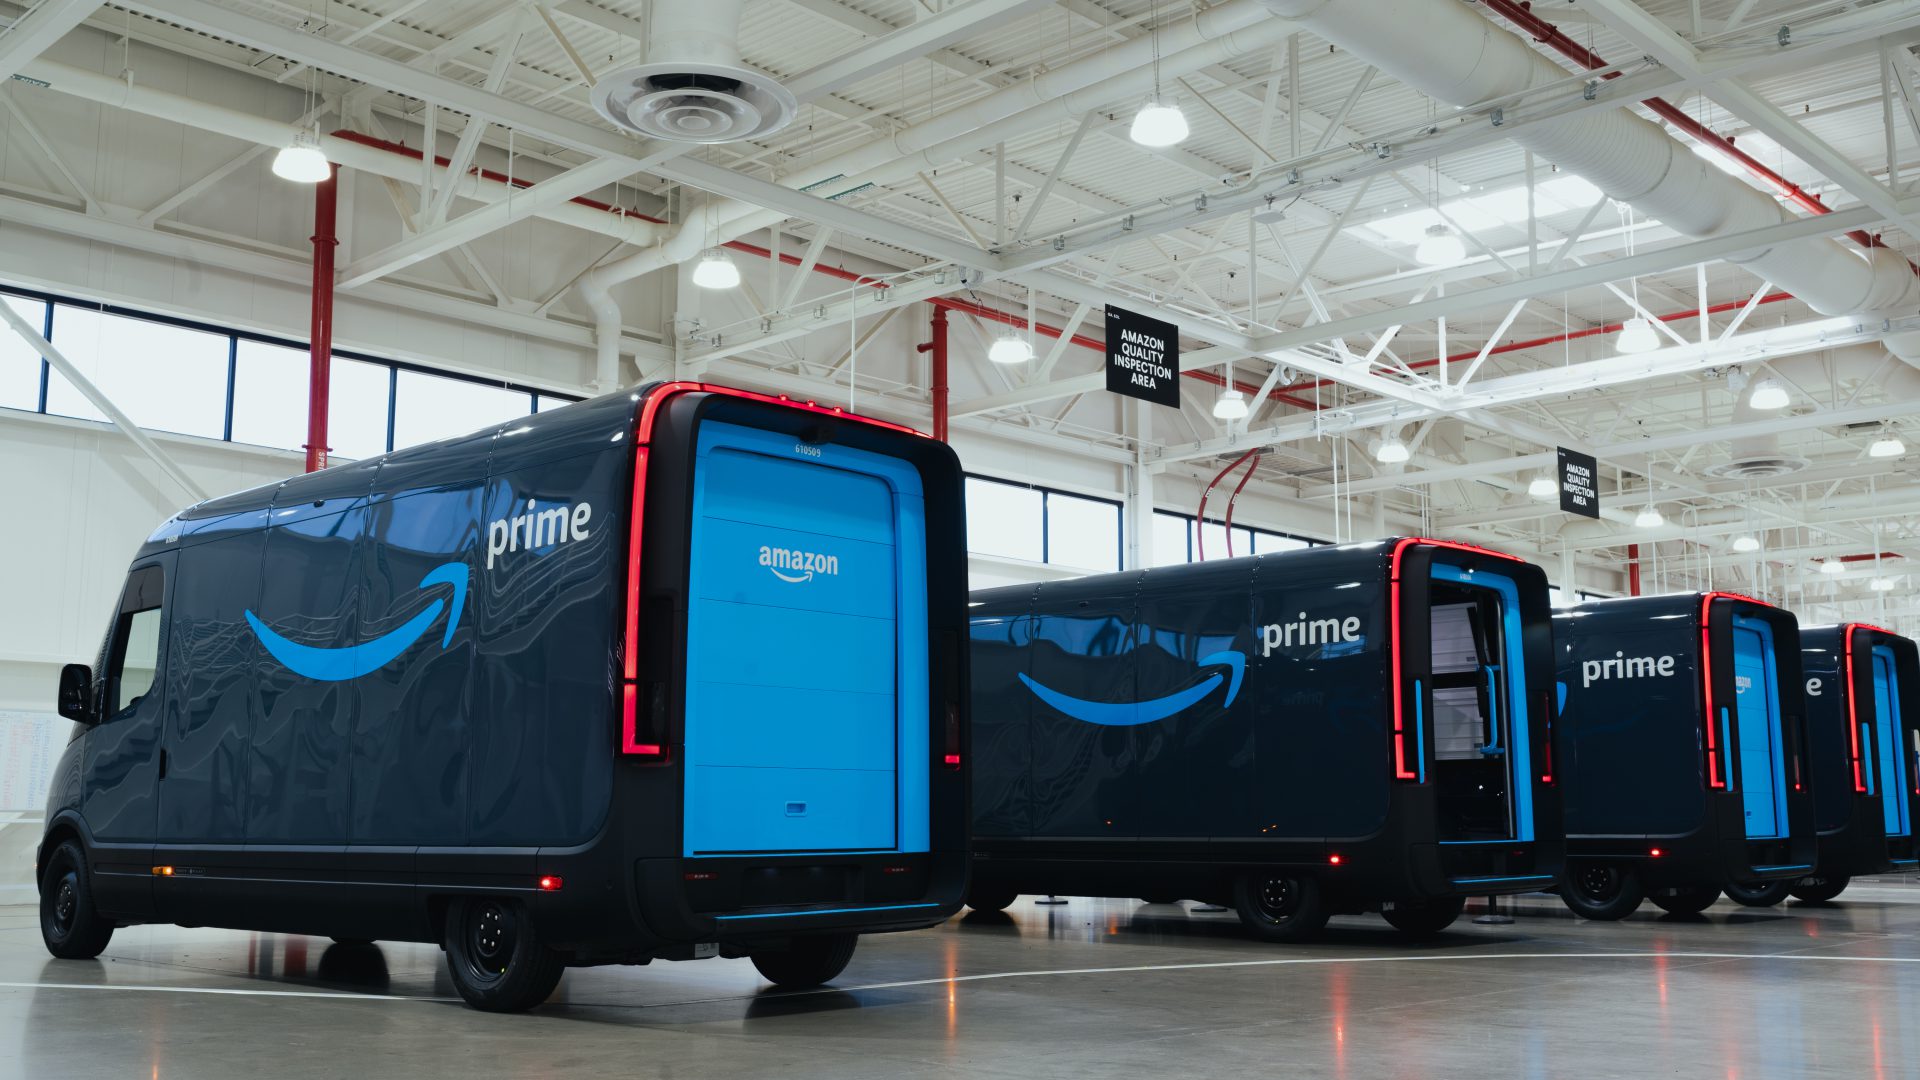 Amazon gets ready for Christmas time deliveries by enhancing its